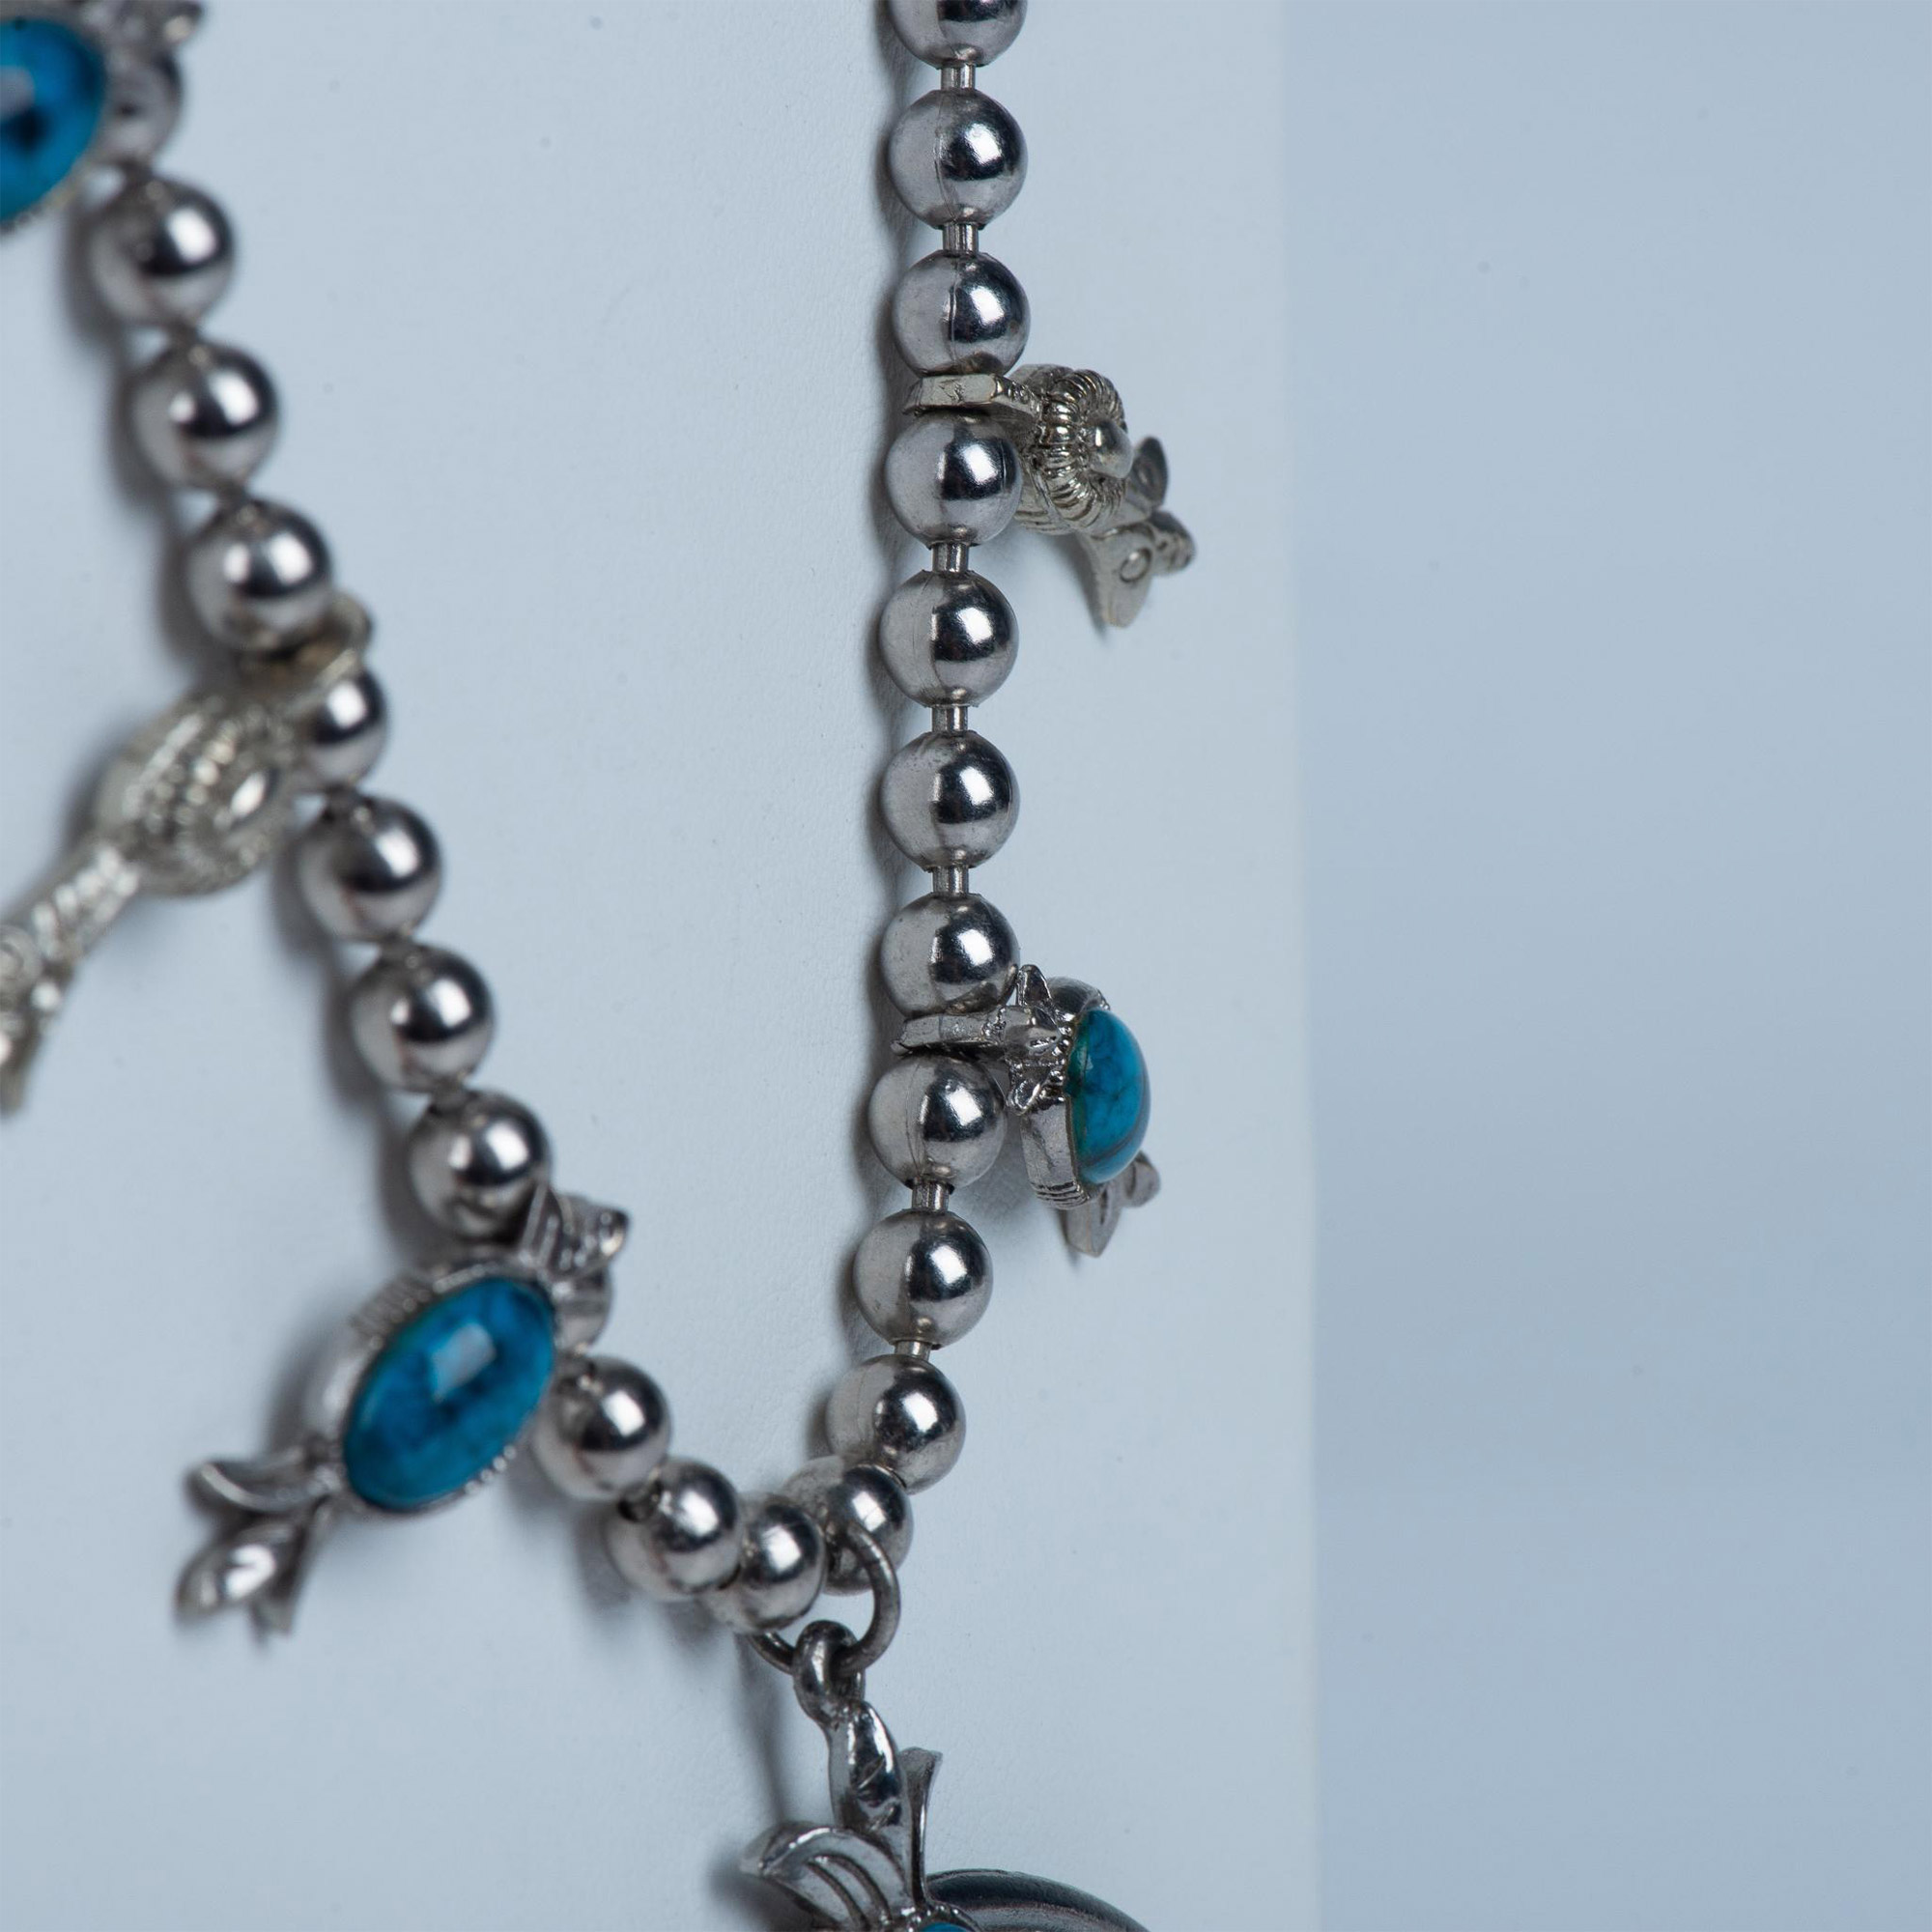 Native American Style Faux Turquoise Squash Blossom Necklace - Image 3 of 3